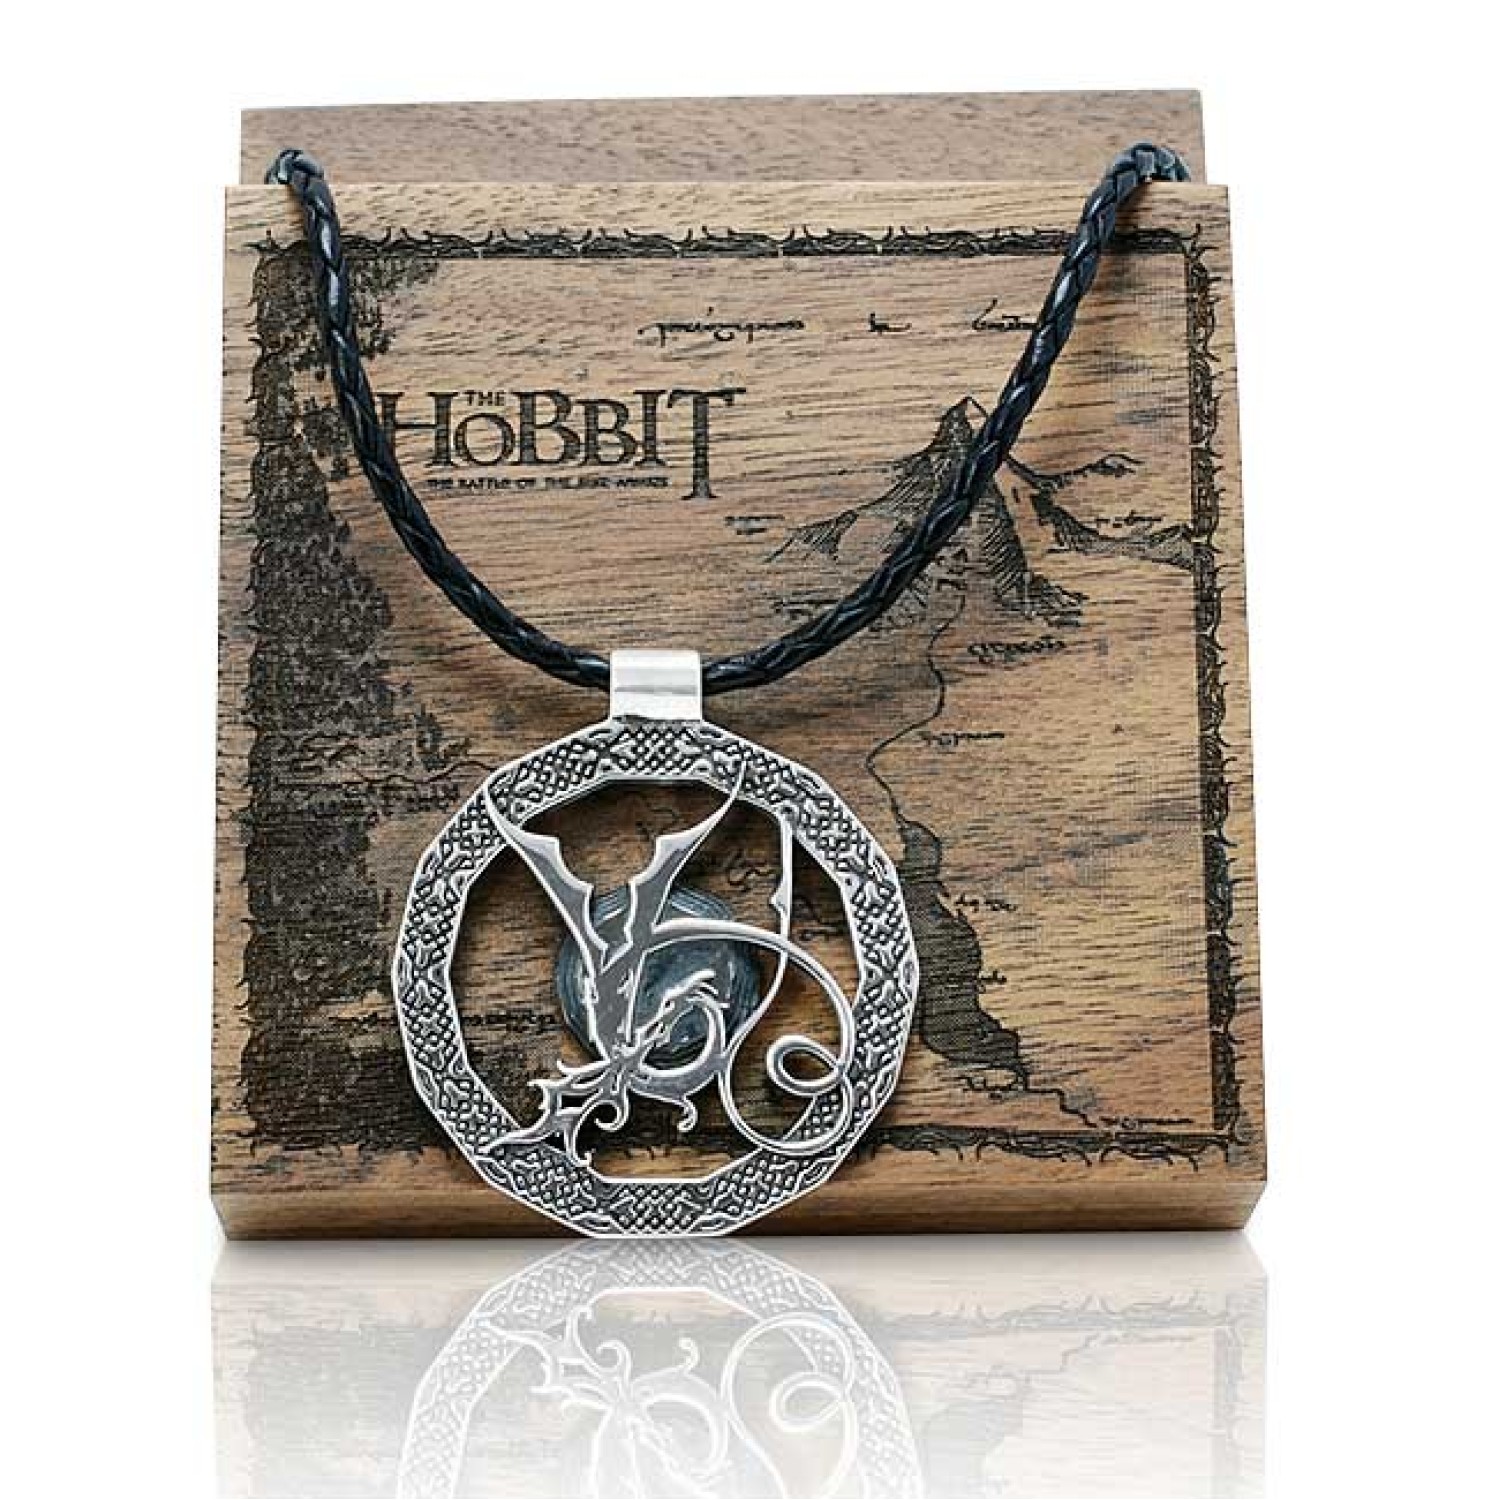 Official The Hobbit Smaug Dragon Pendant. The Official Hobbit Arkenstone Pendant handcrafted here in Middle Earth New Zealand home of the Lord of the Rings and The Hobbit movie trilogys.  This official Arkenstone pendant comes complete with a wooden Colle